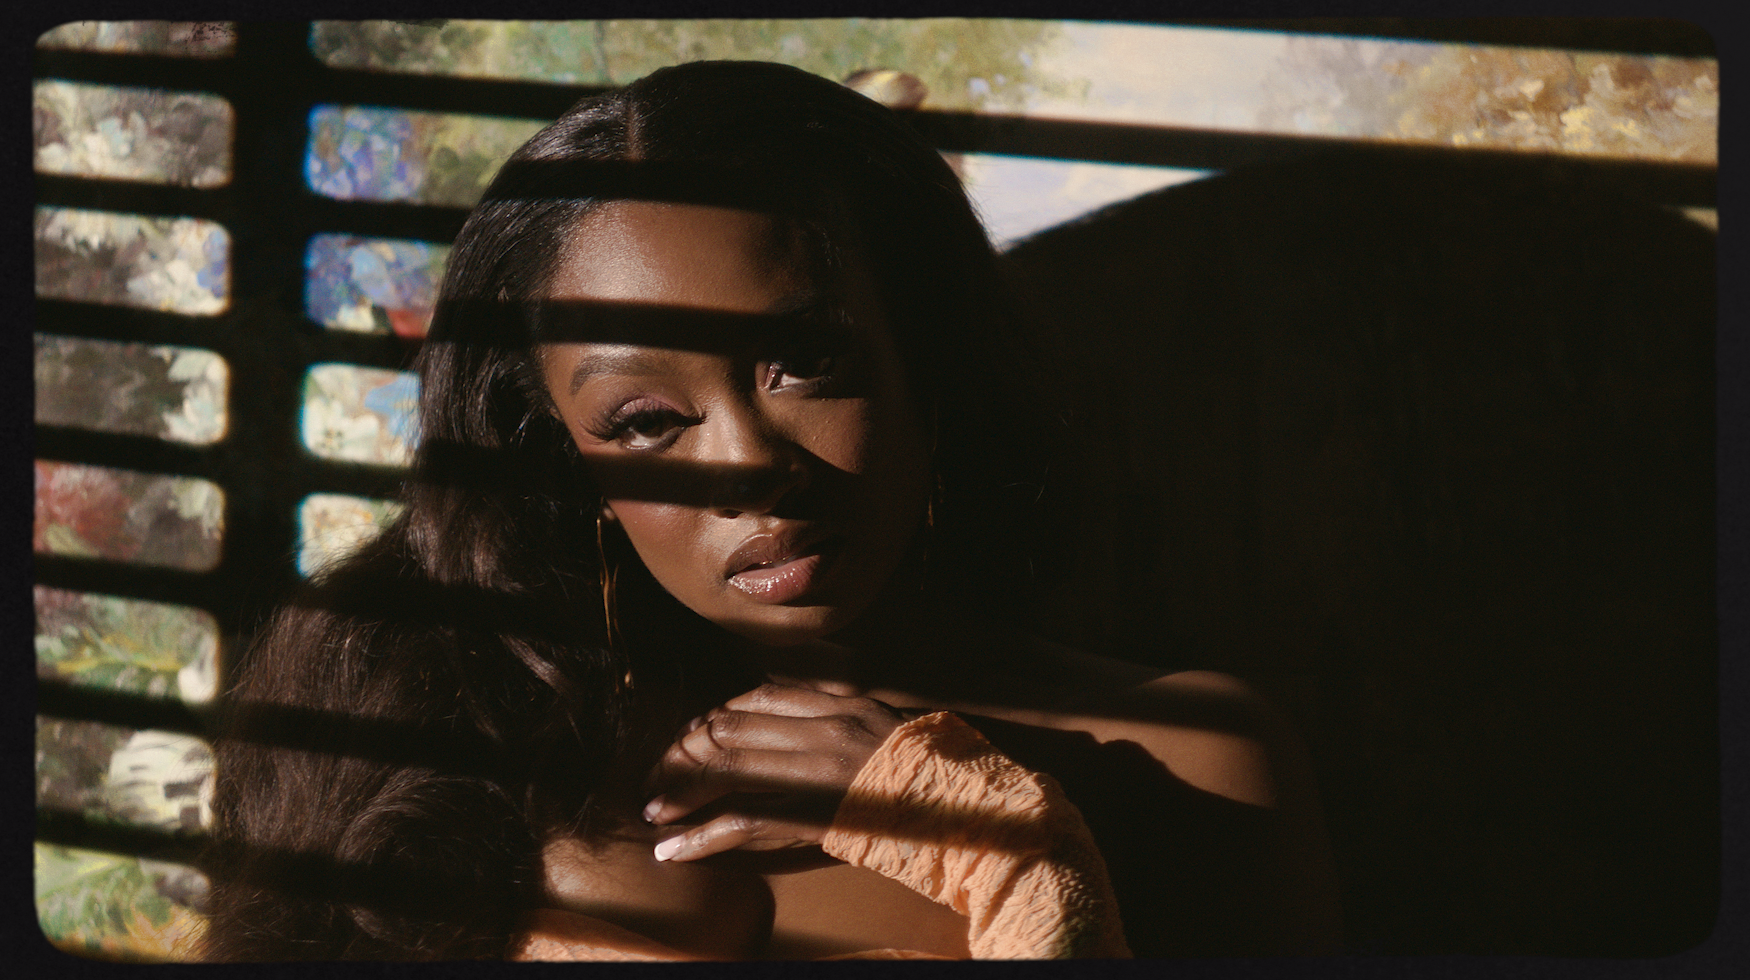 Kayla Brianna's "Down" music video directed by: Lawrence S. Murray